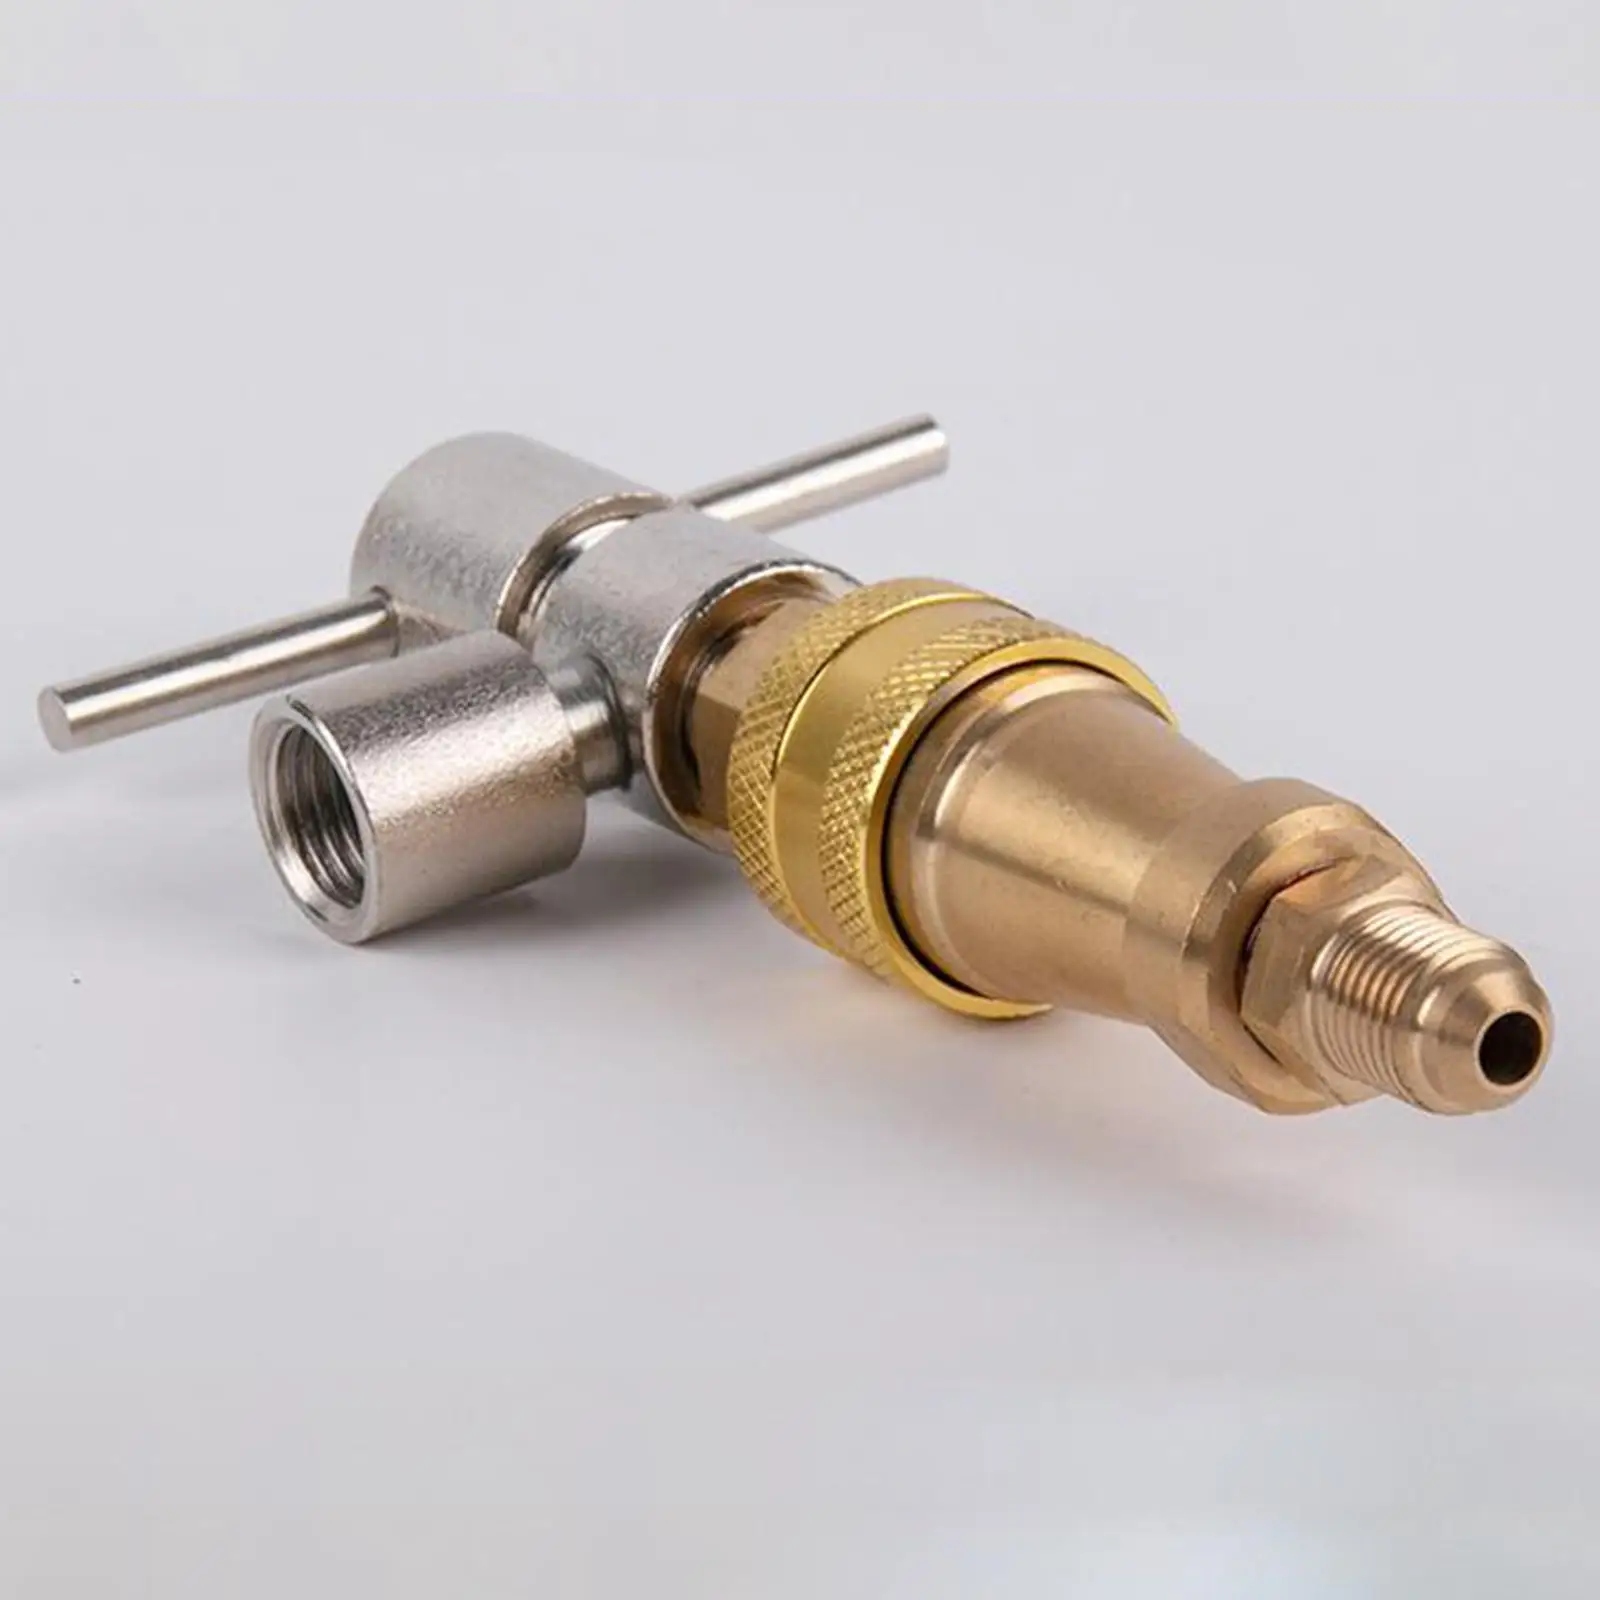 Pressure Washer Quick Connector 1/4in Durable Practical High Hardness Wear Resistance for Home Household Refrigeration